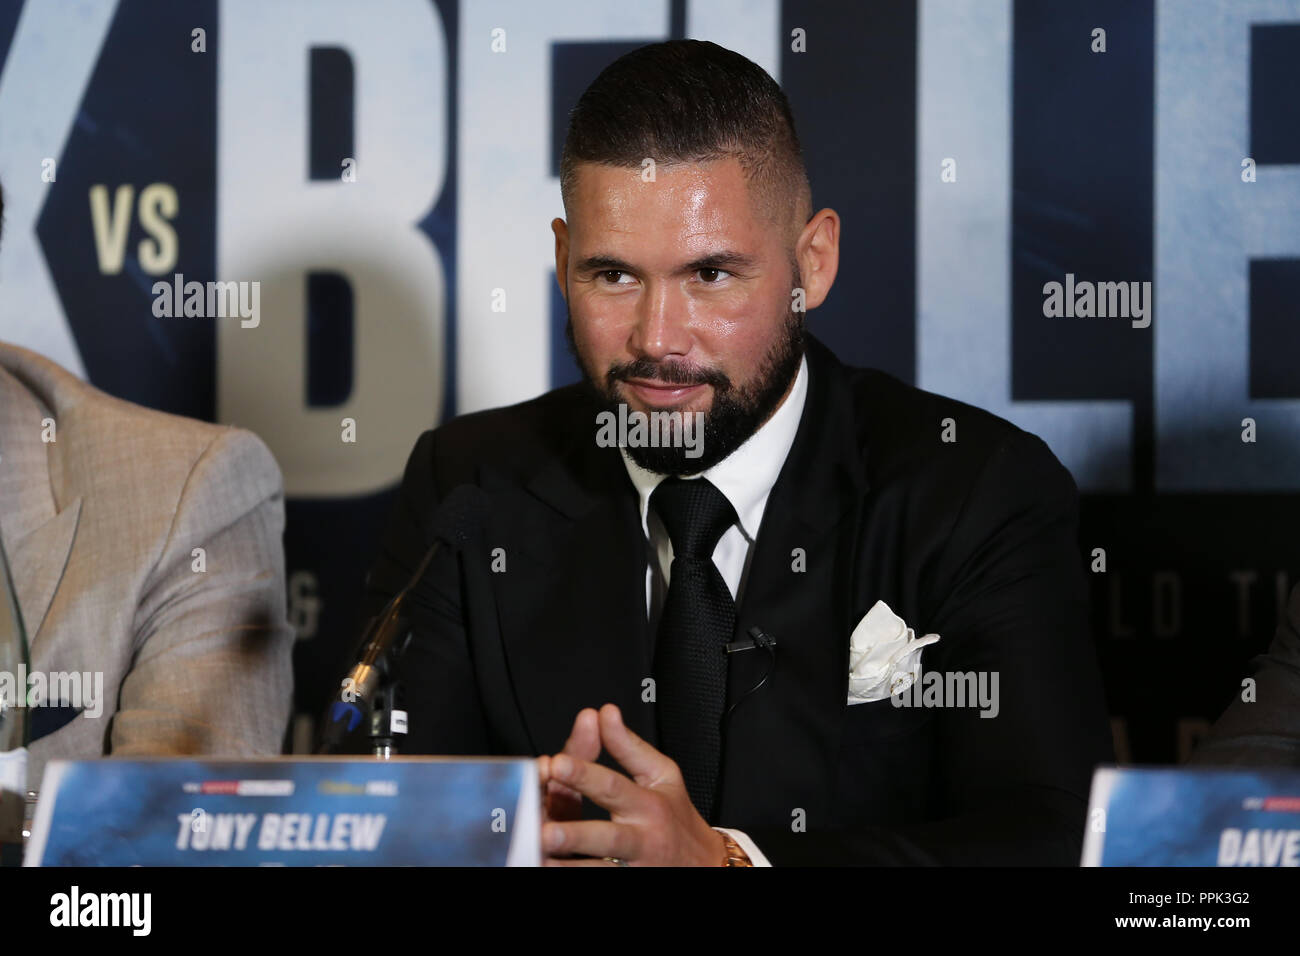 Tony Bellew smiles during the Oleksandr Usyk and Tony Bellew press conference in Manchester, UK. Picture date: 24th September 2018. Picture credit sho Stock Photo